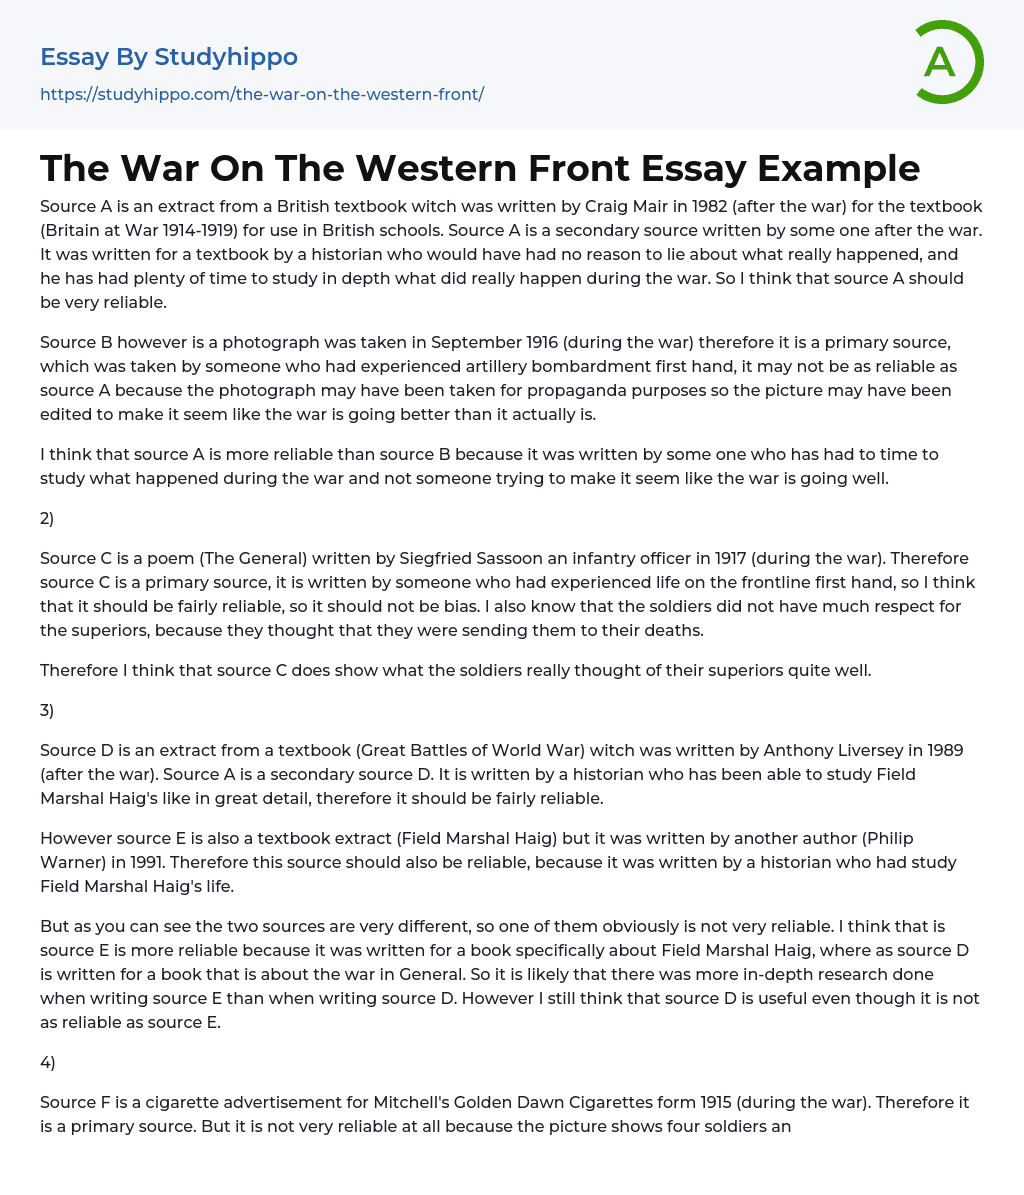 The War On The Western Front Essay Example